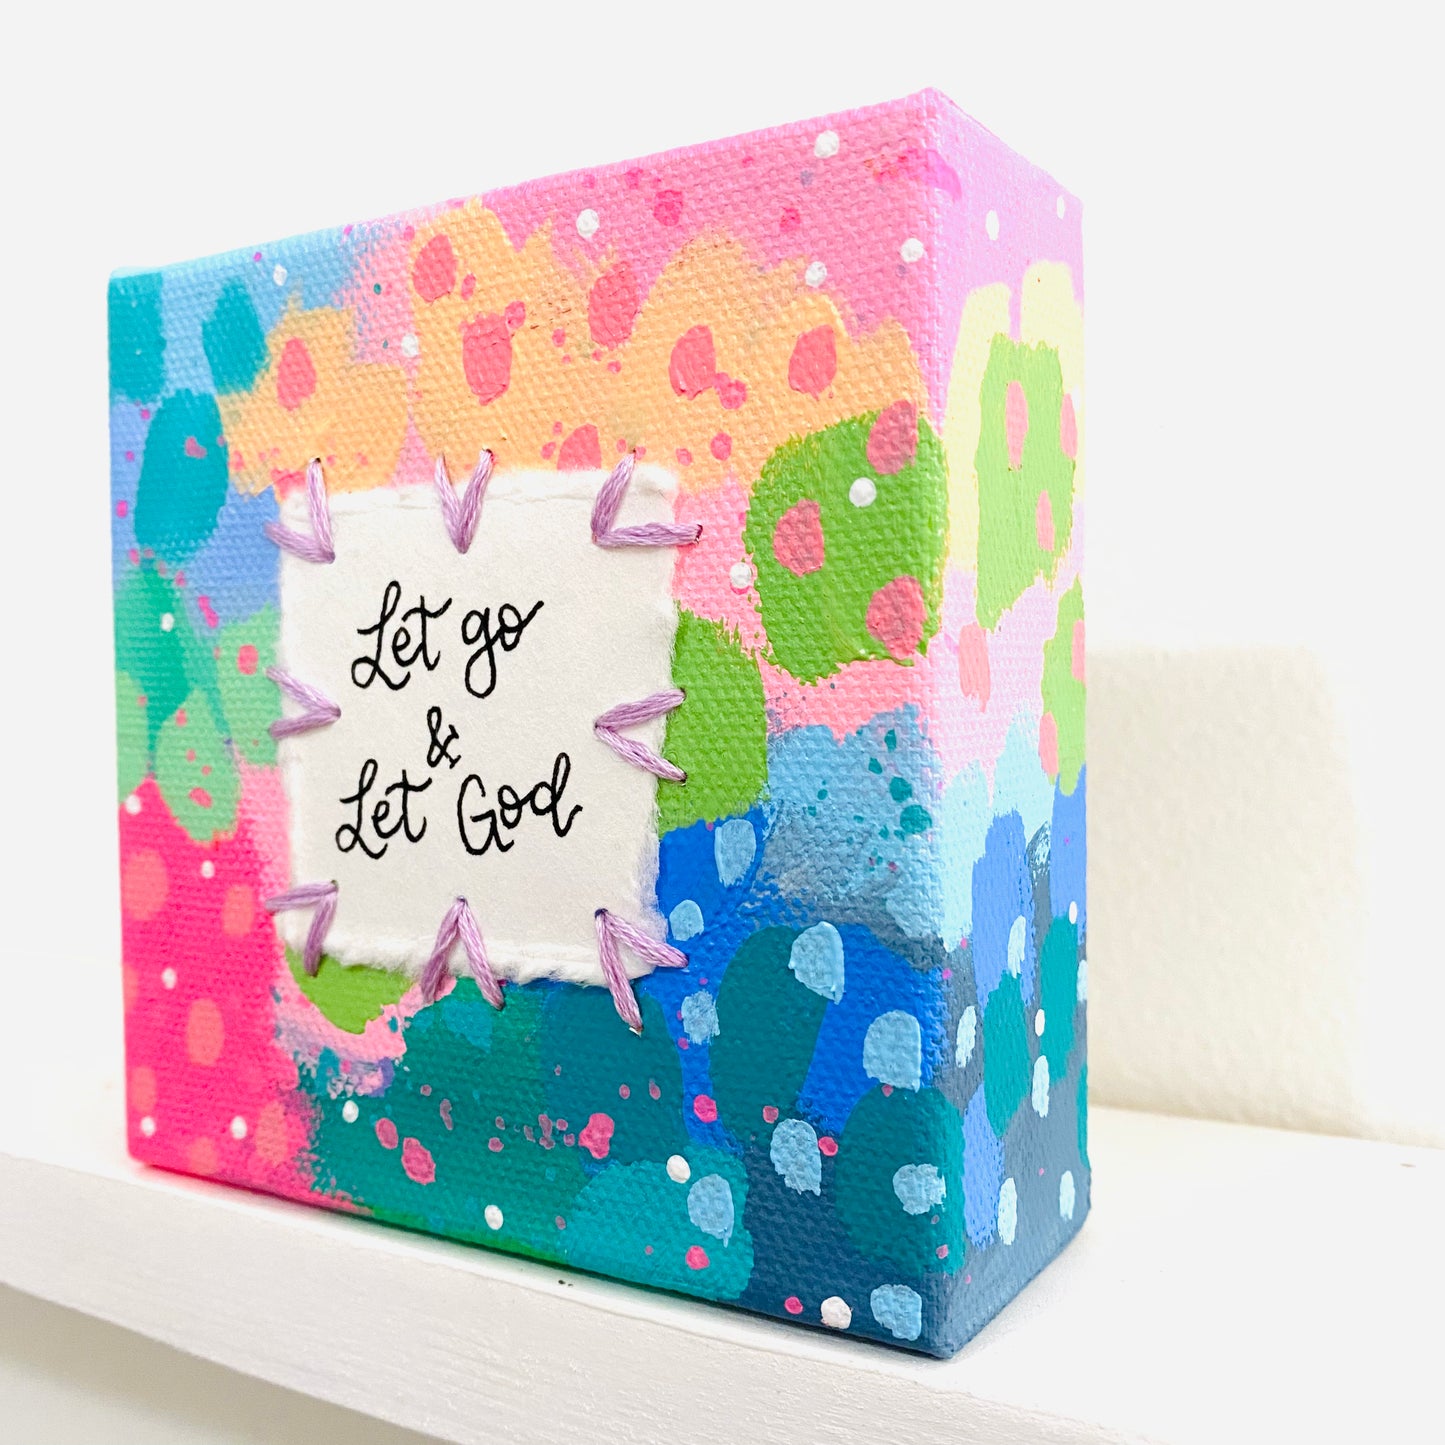 Let Go & Let God 4x4 inch original abstract canvas with embroidery thread accents